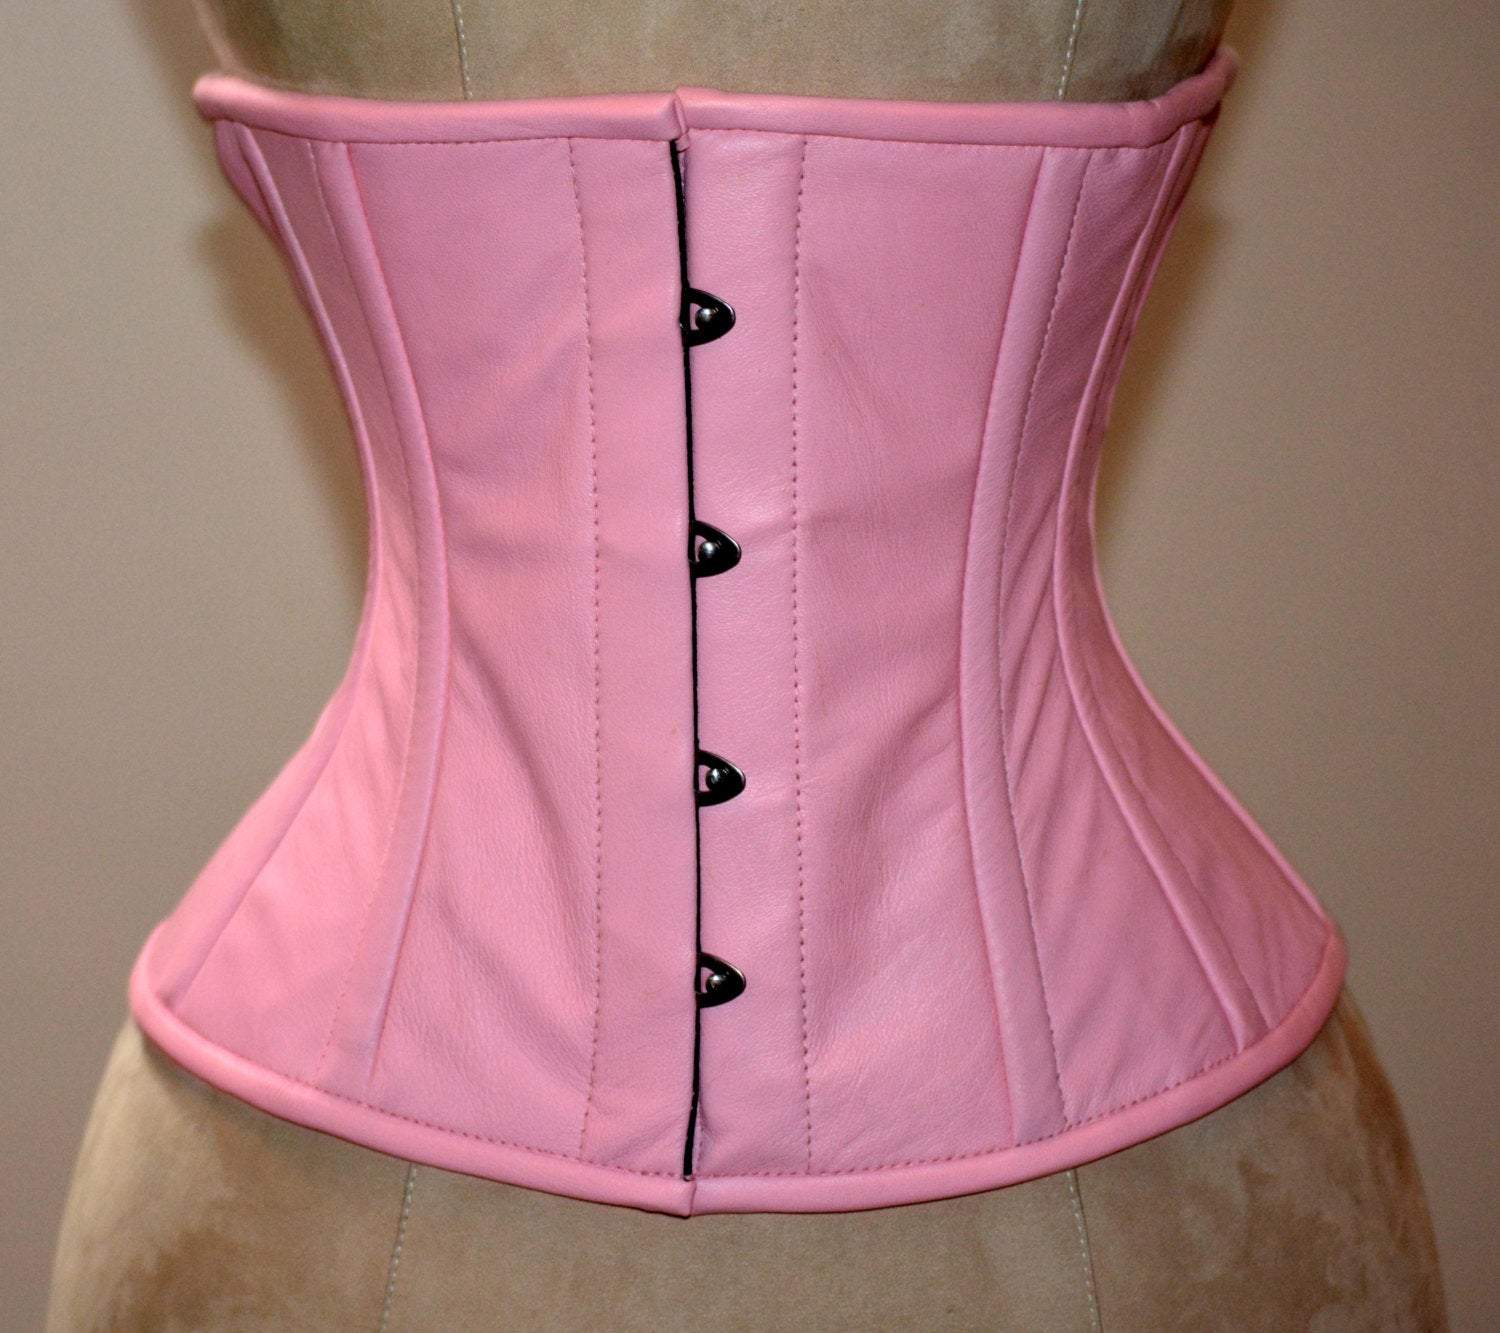 Real leather waist steel-boned authentic corset of the pale pink color.  Corset for tight lacing and waist training, steampunk, gothic